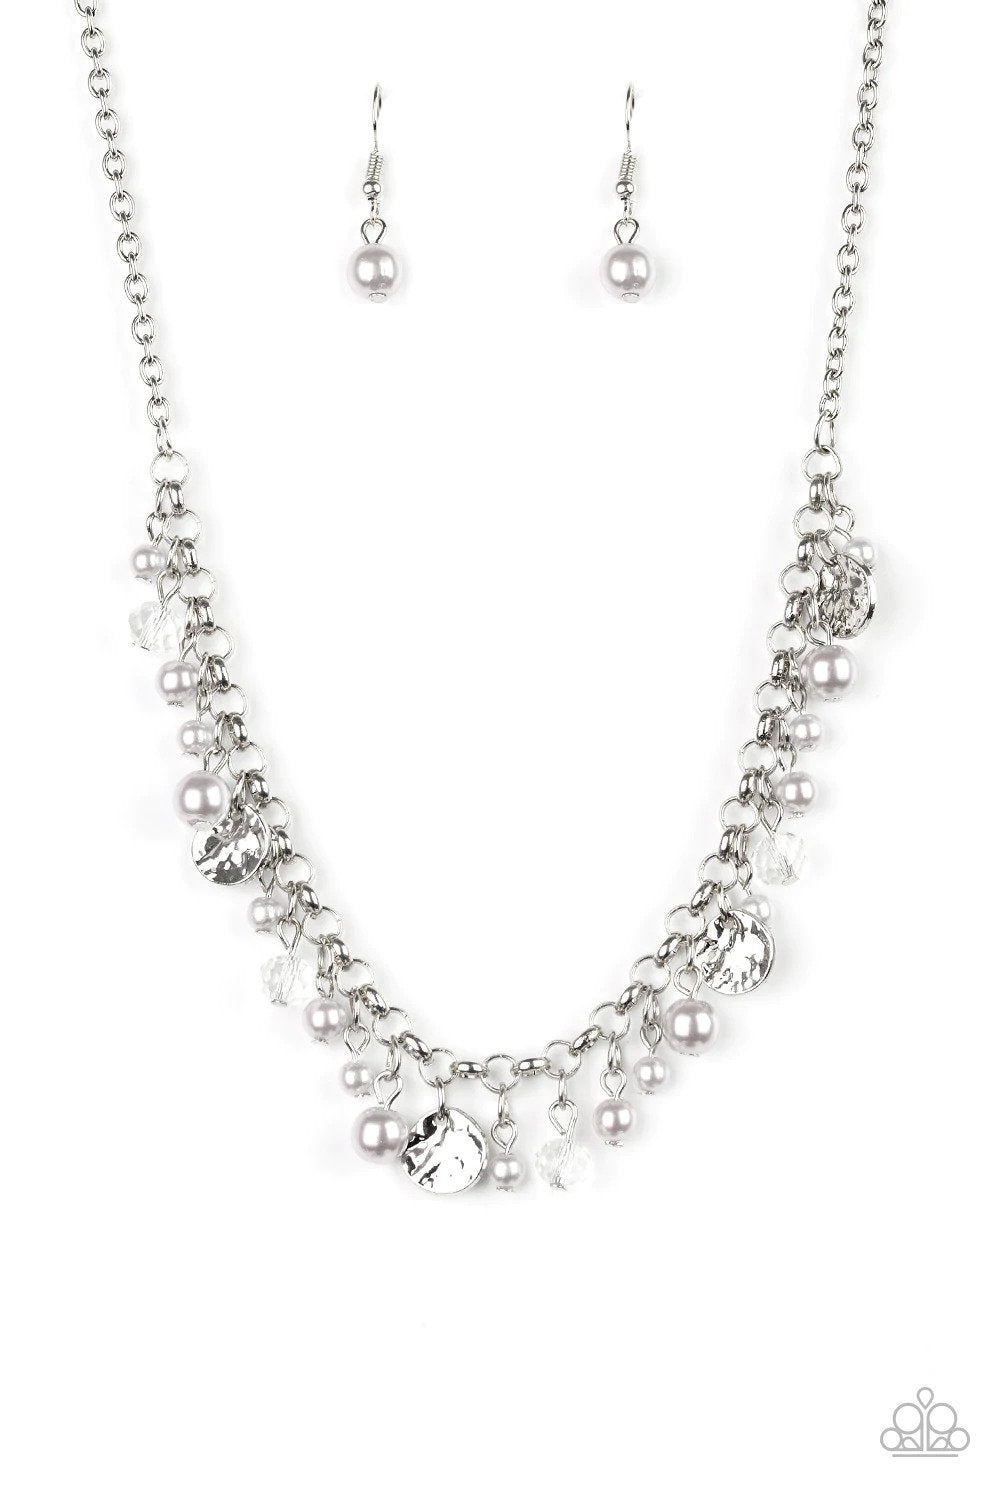 Coastal Cache Silver Necklace - Paparazzi Accessories- lightbox - CarasShop.com - $5 Jewelry by Cara Jewels